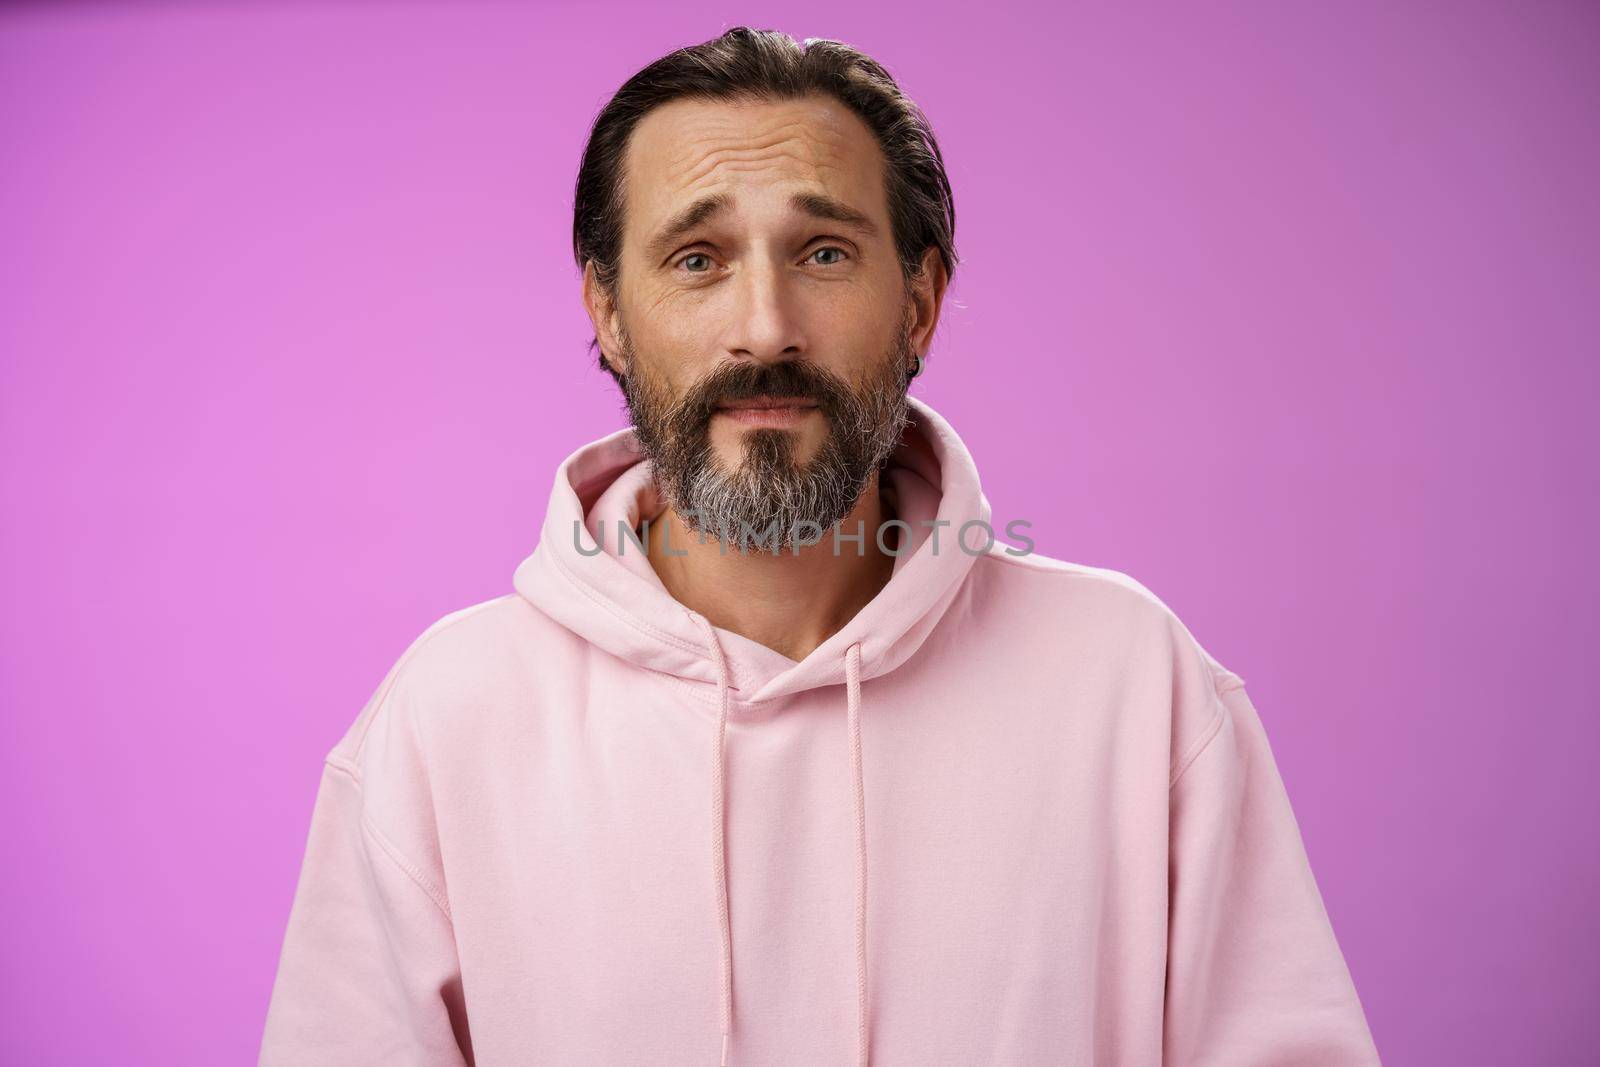 Upset worried unconfident adult bearded caucasian man grey hair frowning look hopefully nervously waiting important news, standing anxious hesitant unhappy, standing purple background unwell.